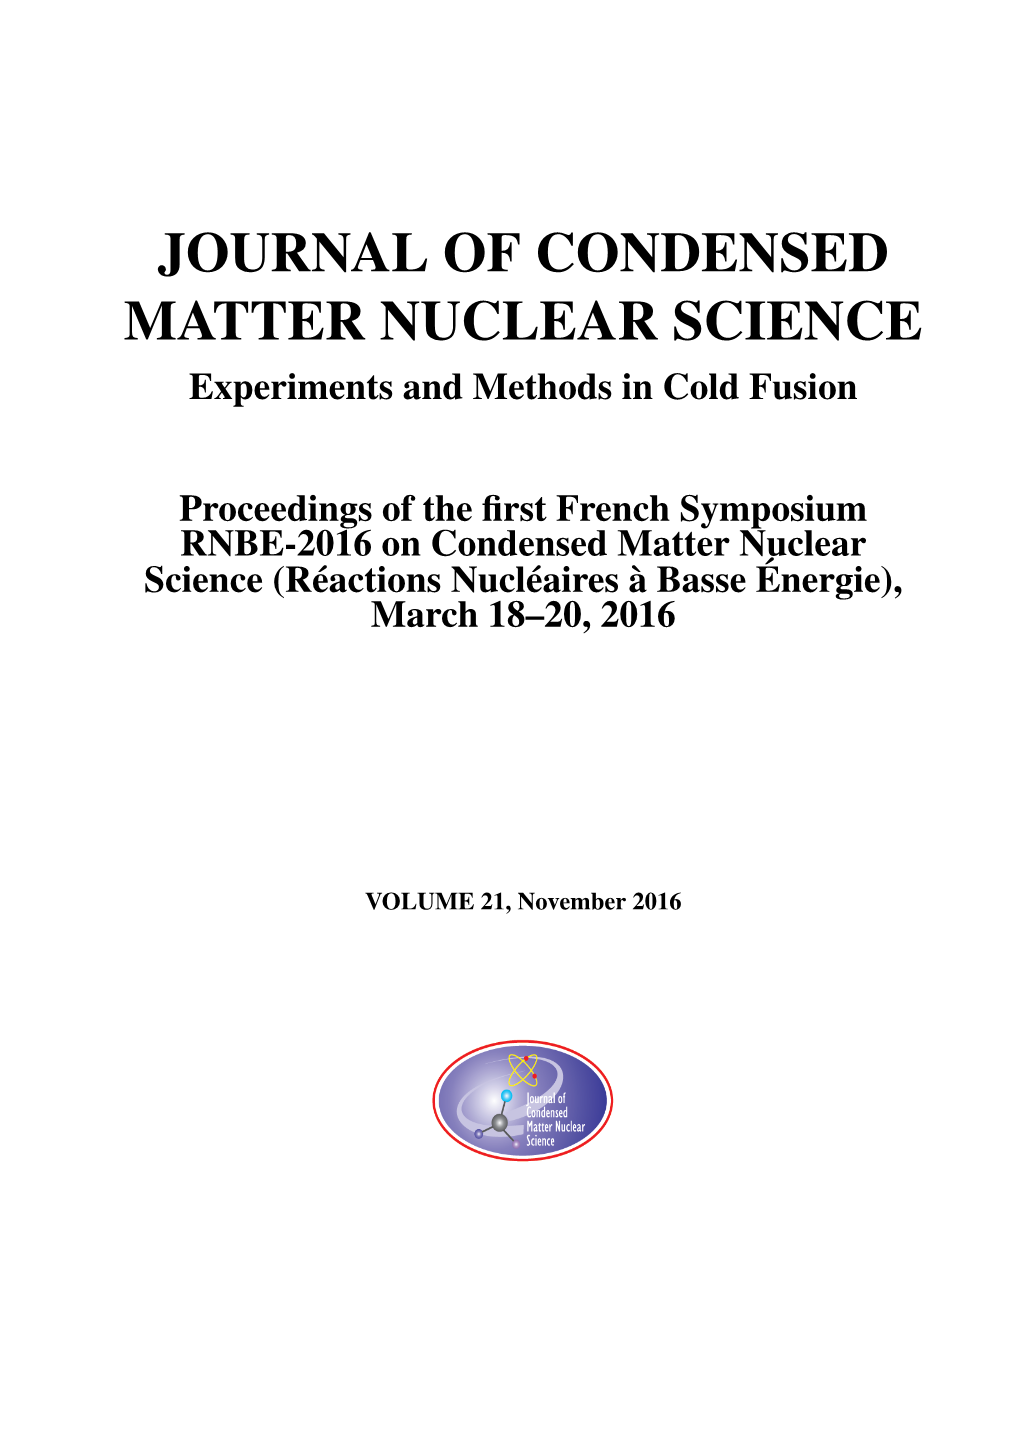 JOURNAL of CONDENSED MATTER NUCLEAR SCIENCE Experiments and Methods in Cold Fusion